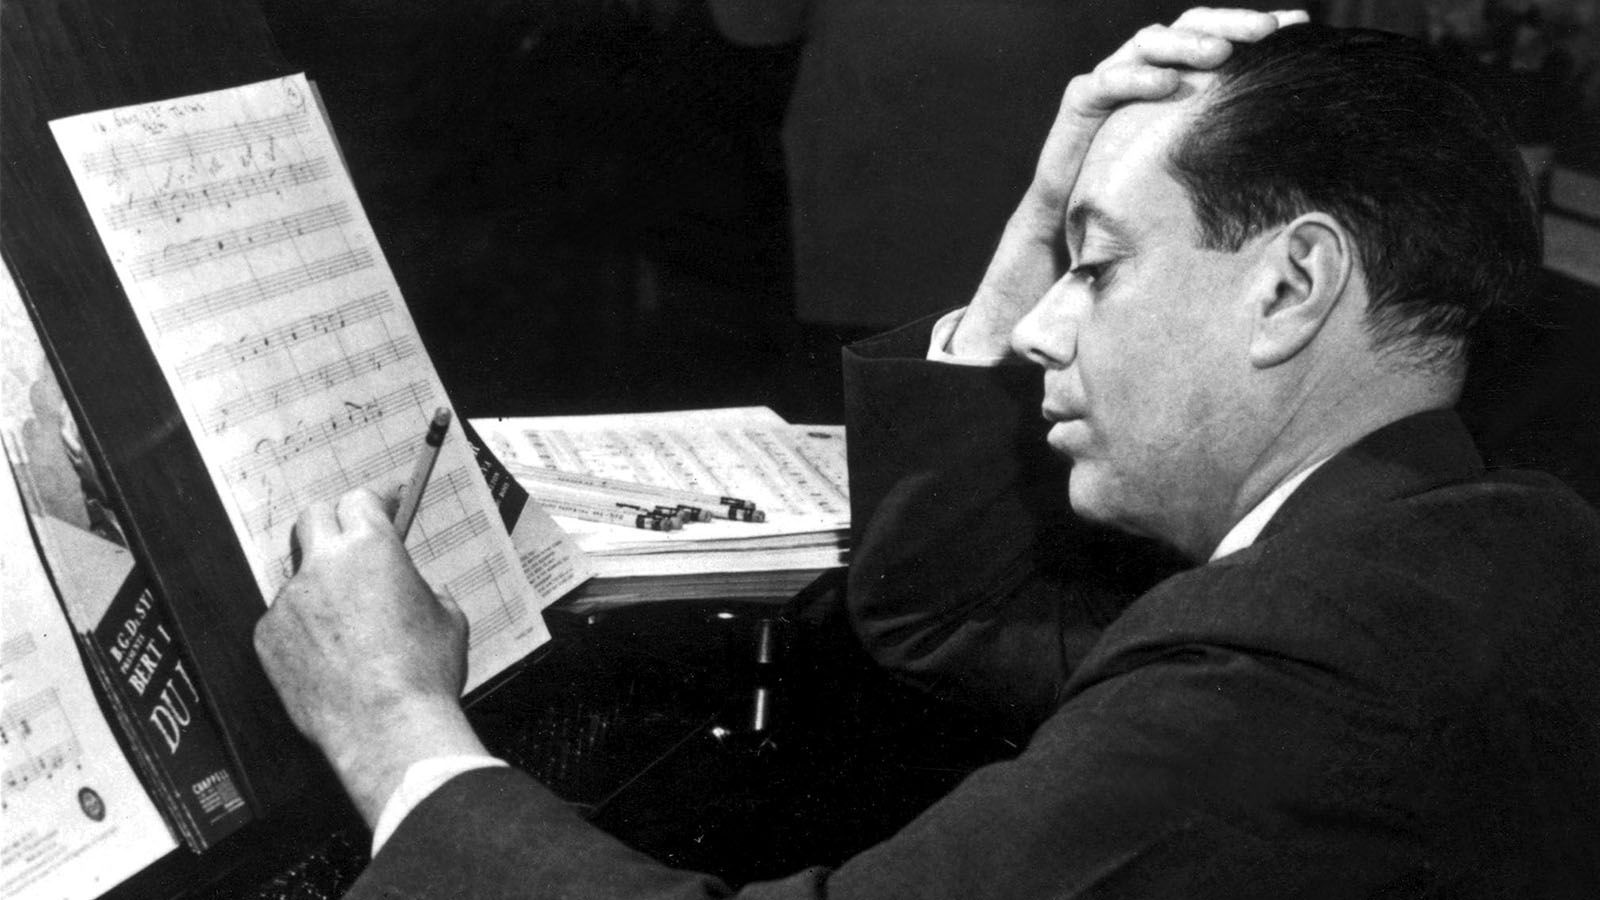 Purdue University Fort Wayne will pay homage to Indiana native Cole Porter with their production of Hot ‘n’ Cole at Williams Theatre, April 5-7.